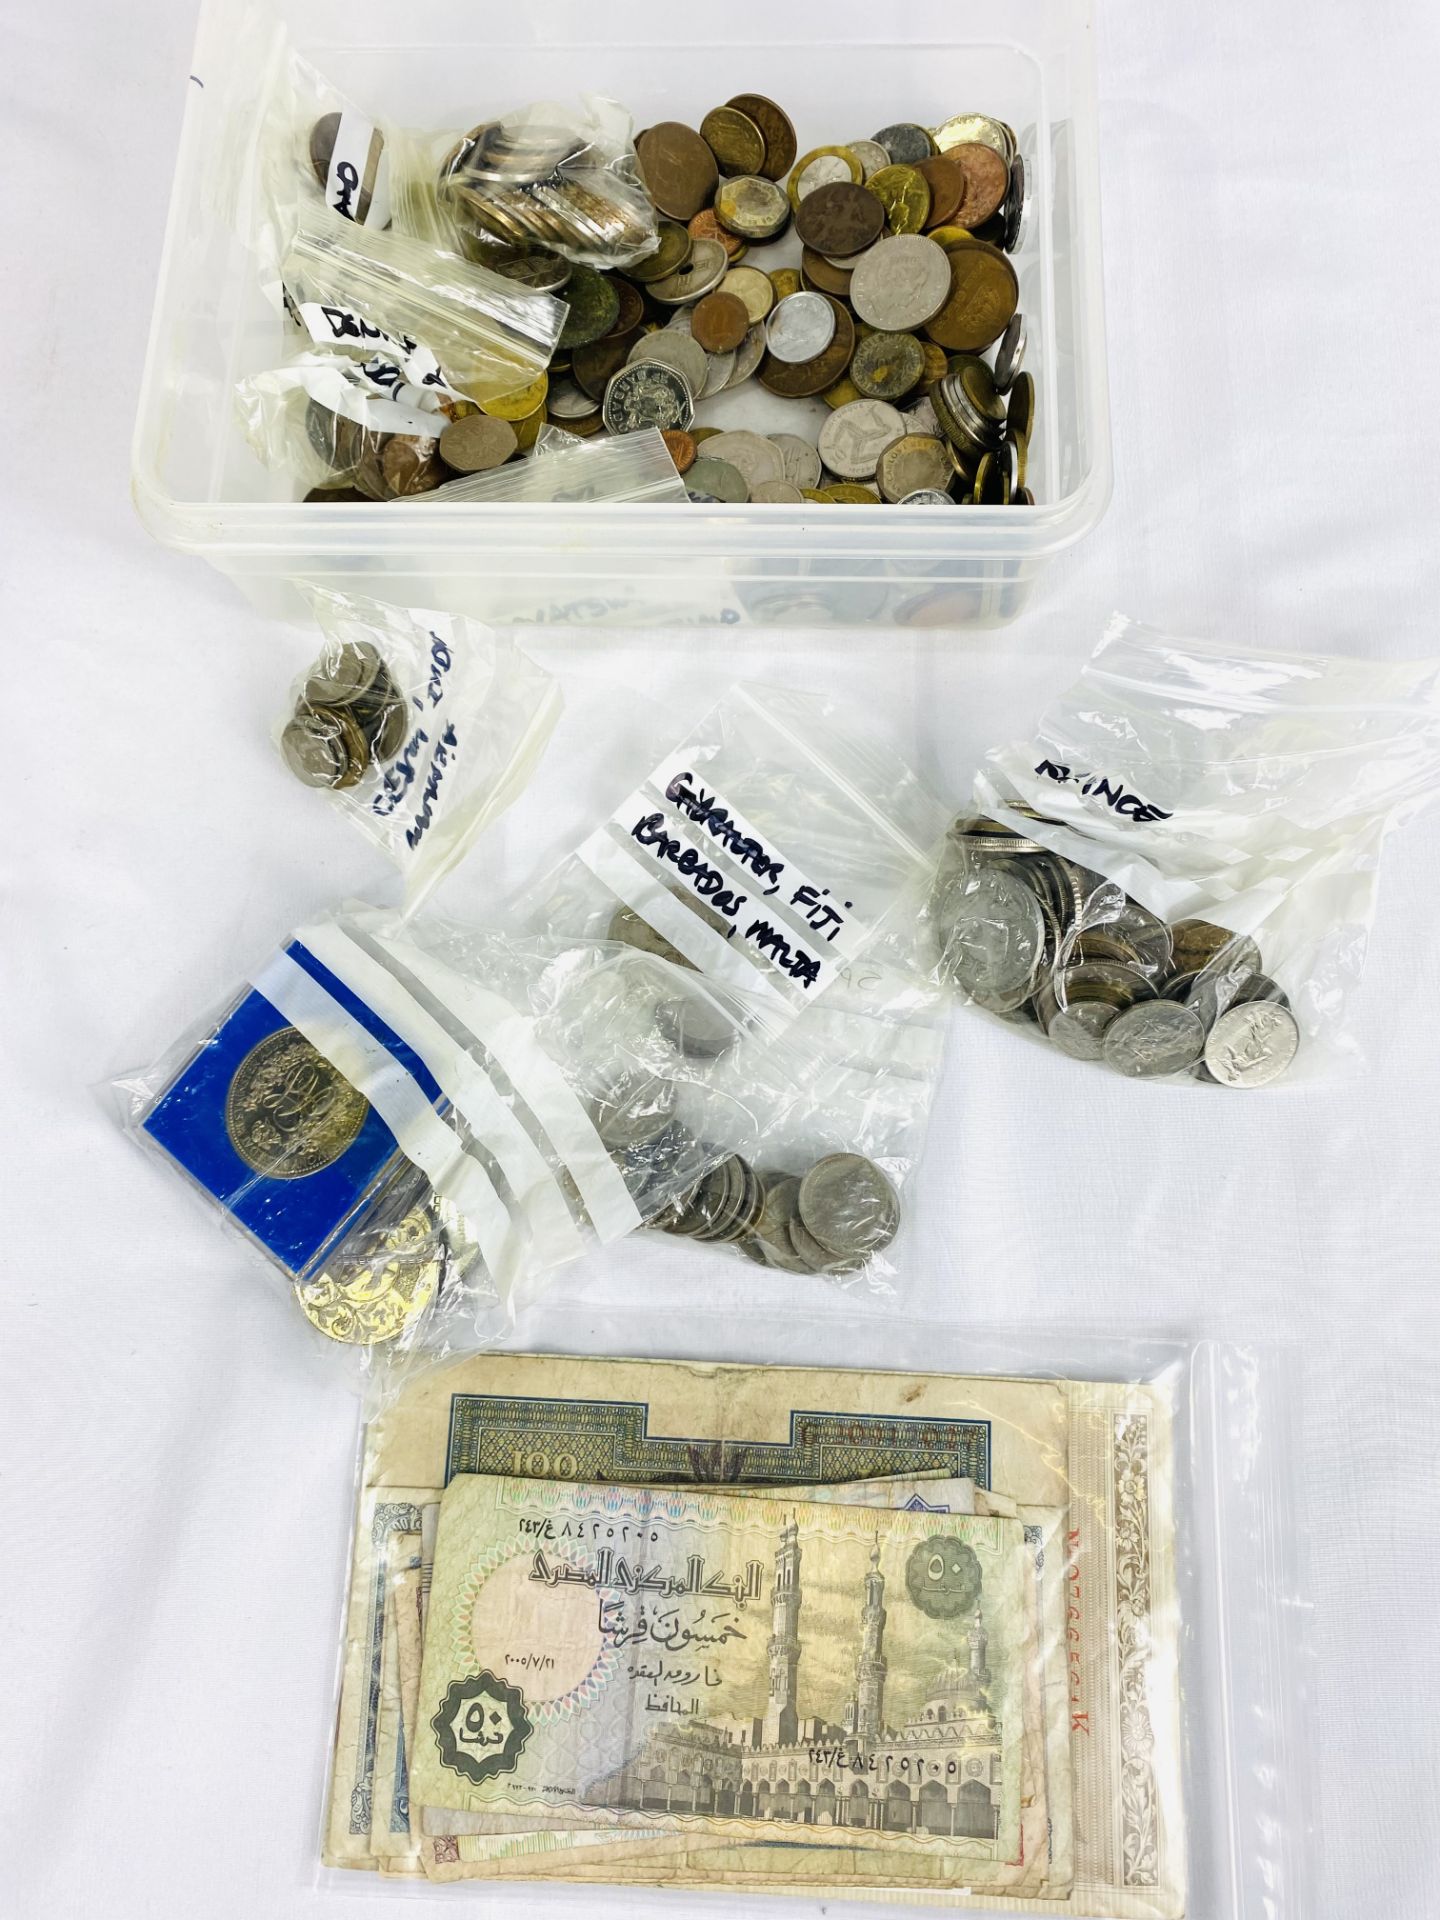 Quantity of World coins and banknotes.